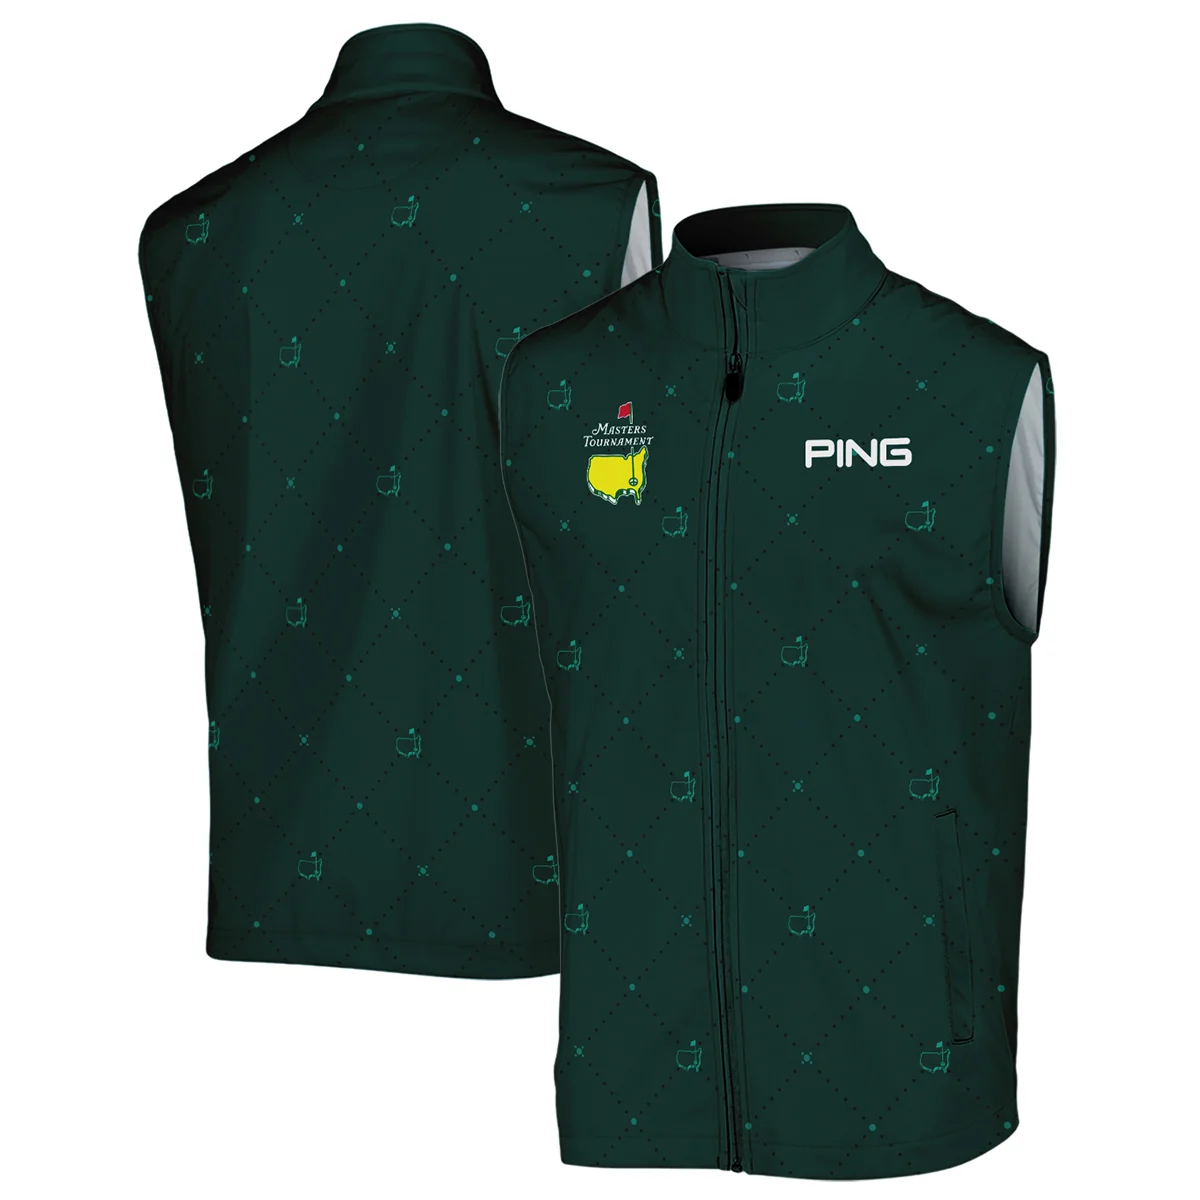 Dark Green Pattern In Retro Style With Logo Masters Tournament Ping Vneck Long Polo Shirt Style Classic Long Polo Shirt For Men